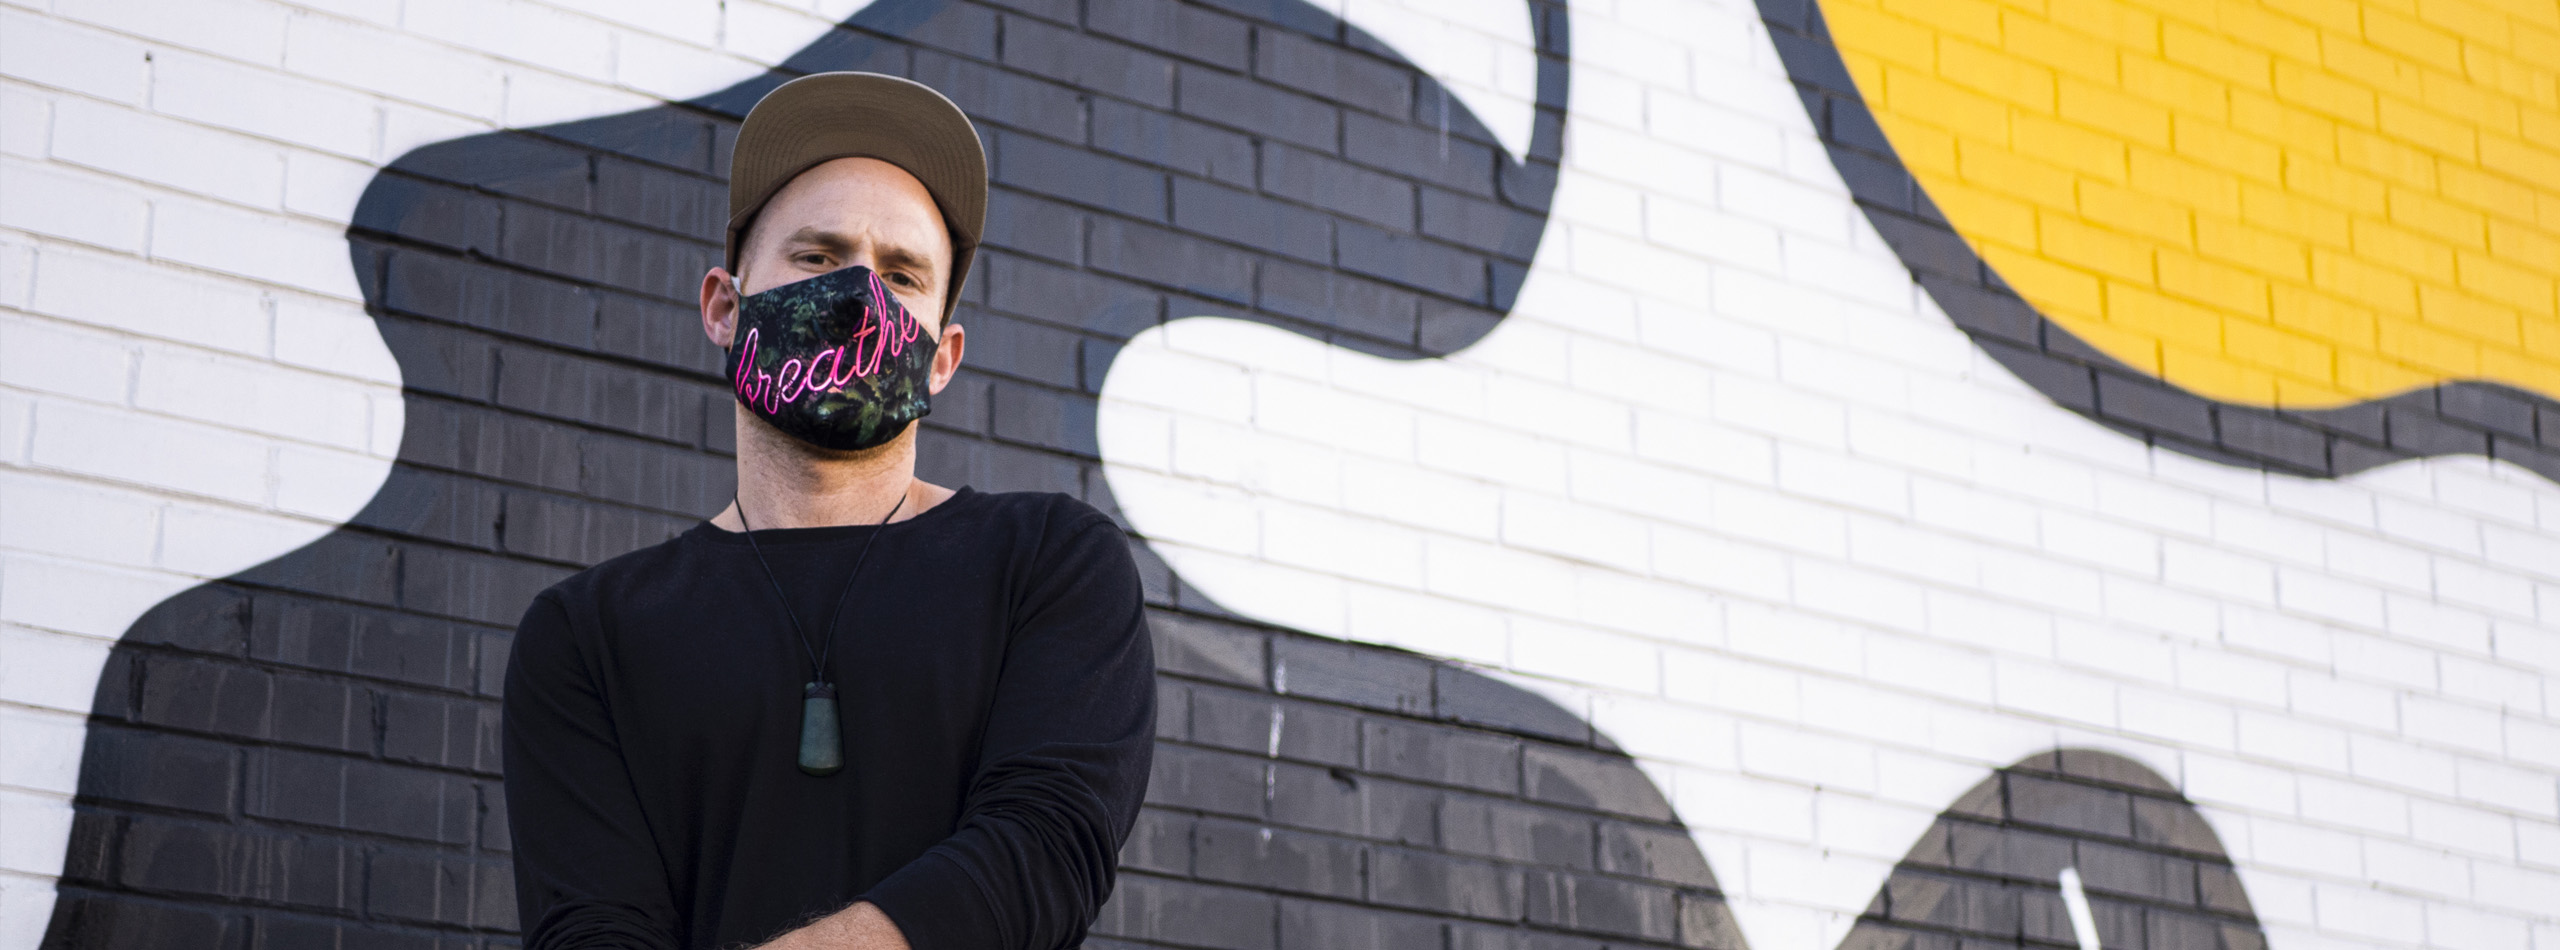 Man with custom printed face covering in front of brick wall